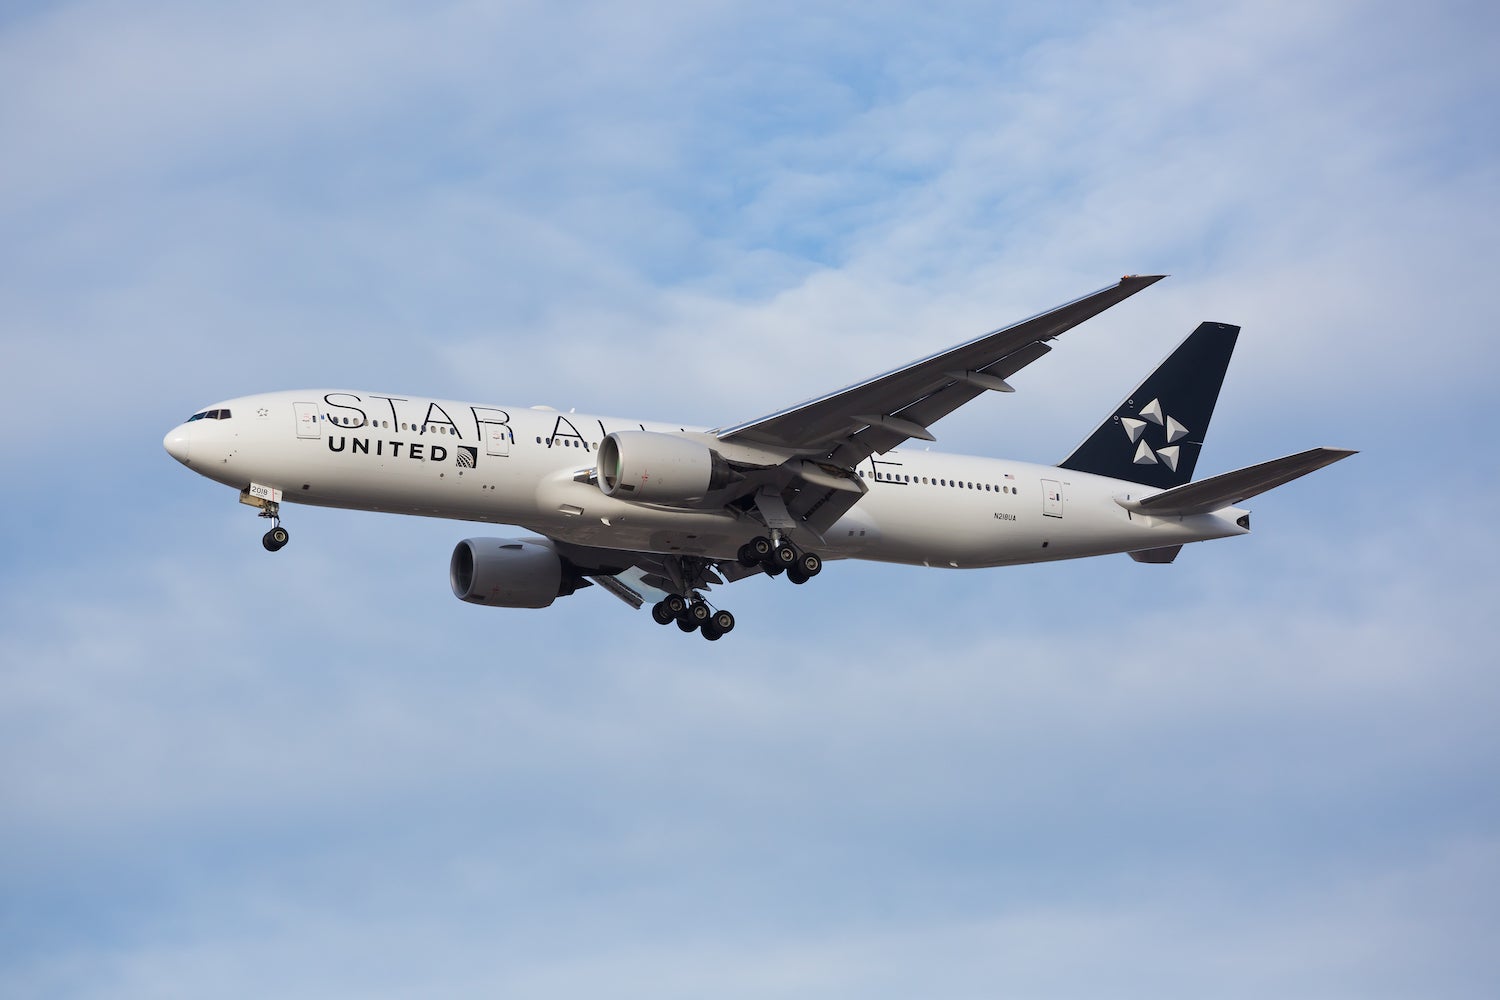 United Airlines Plane in Star Alliance Livery